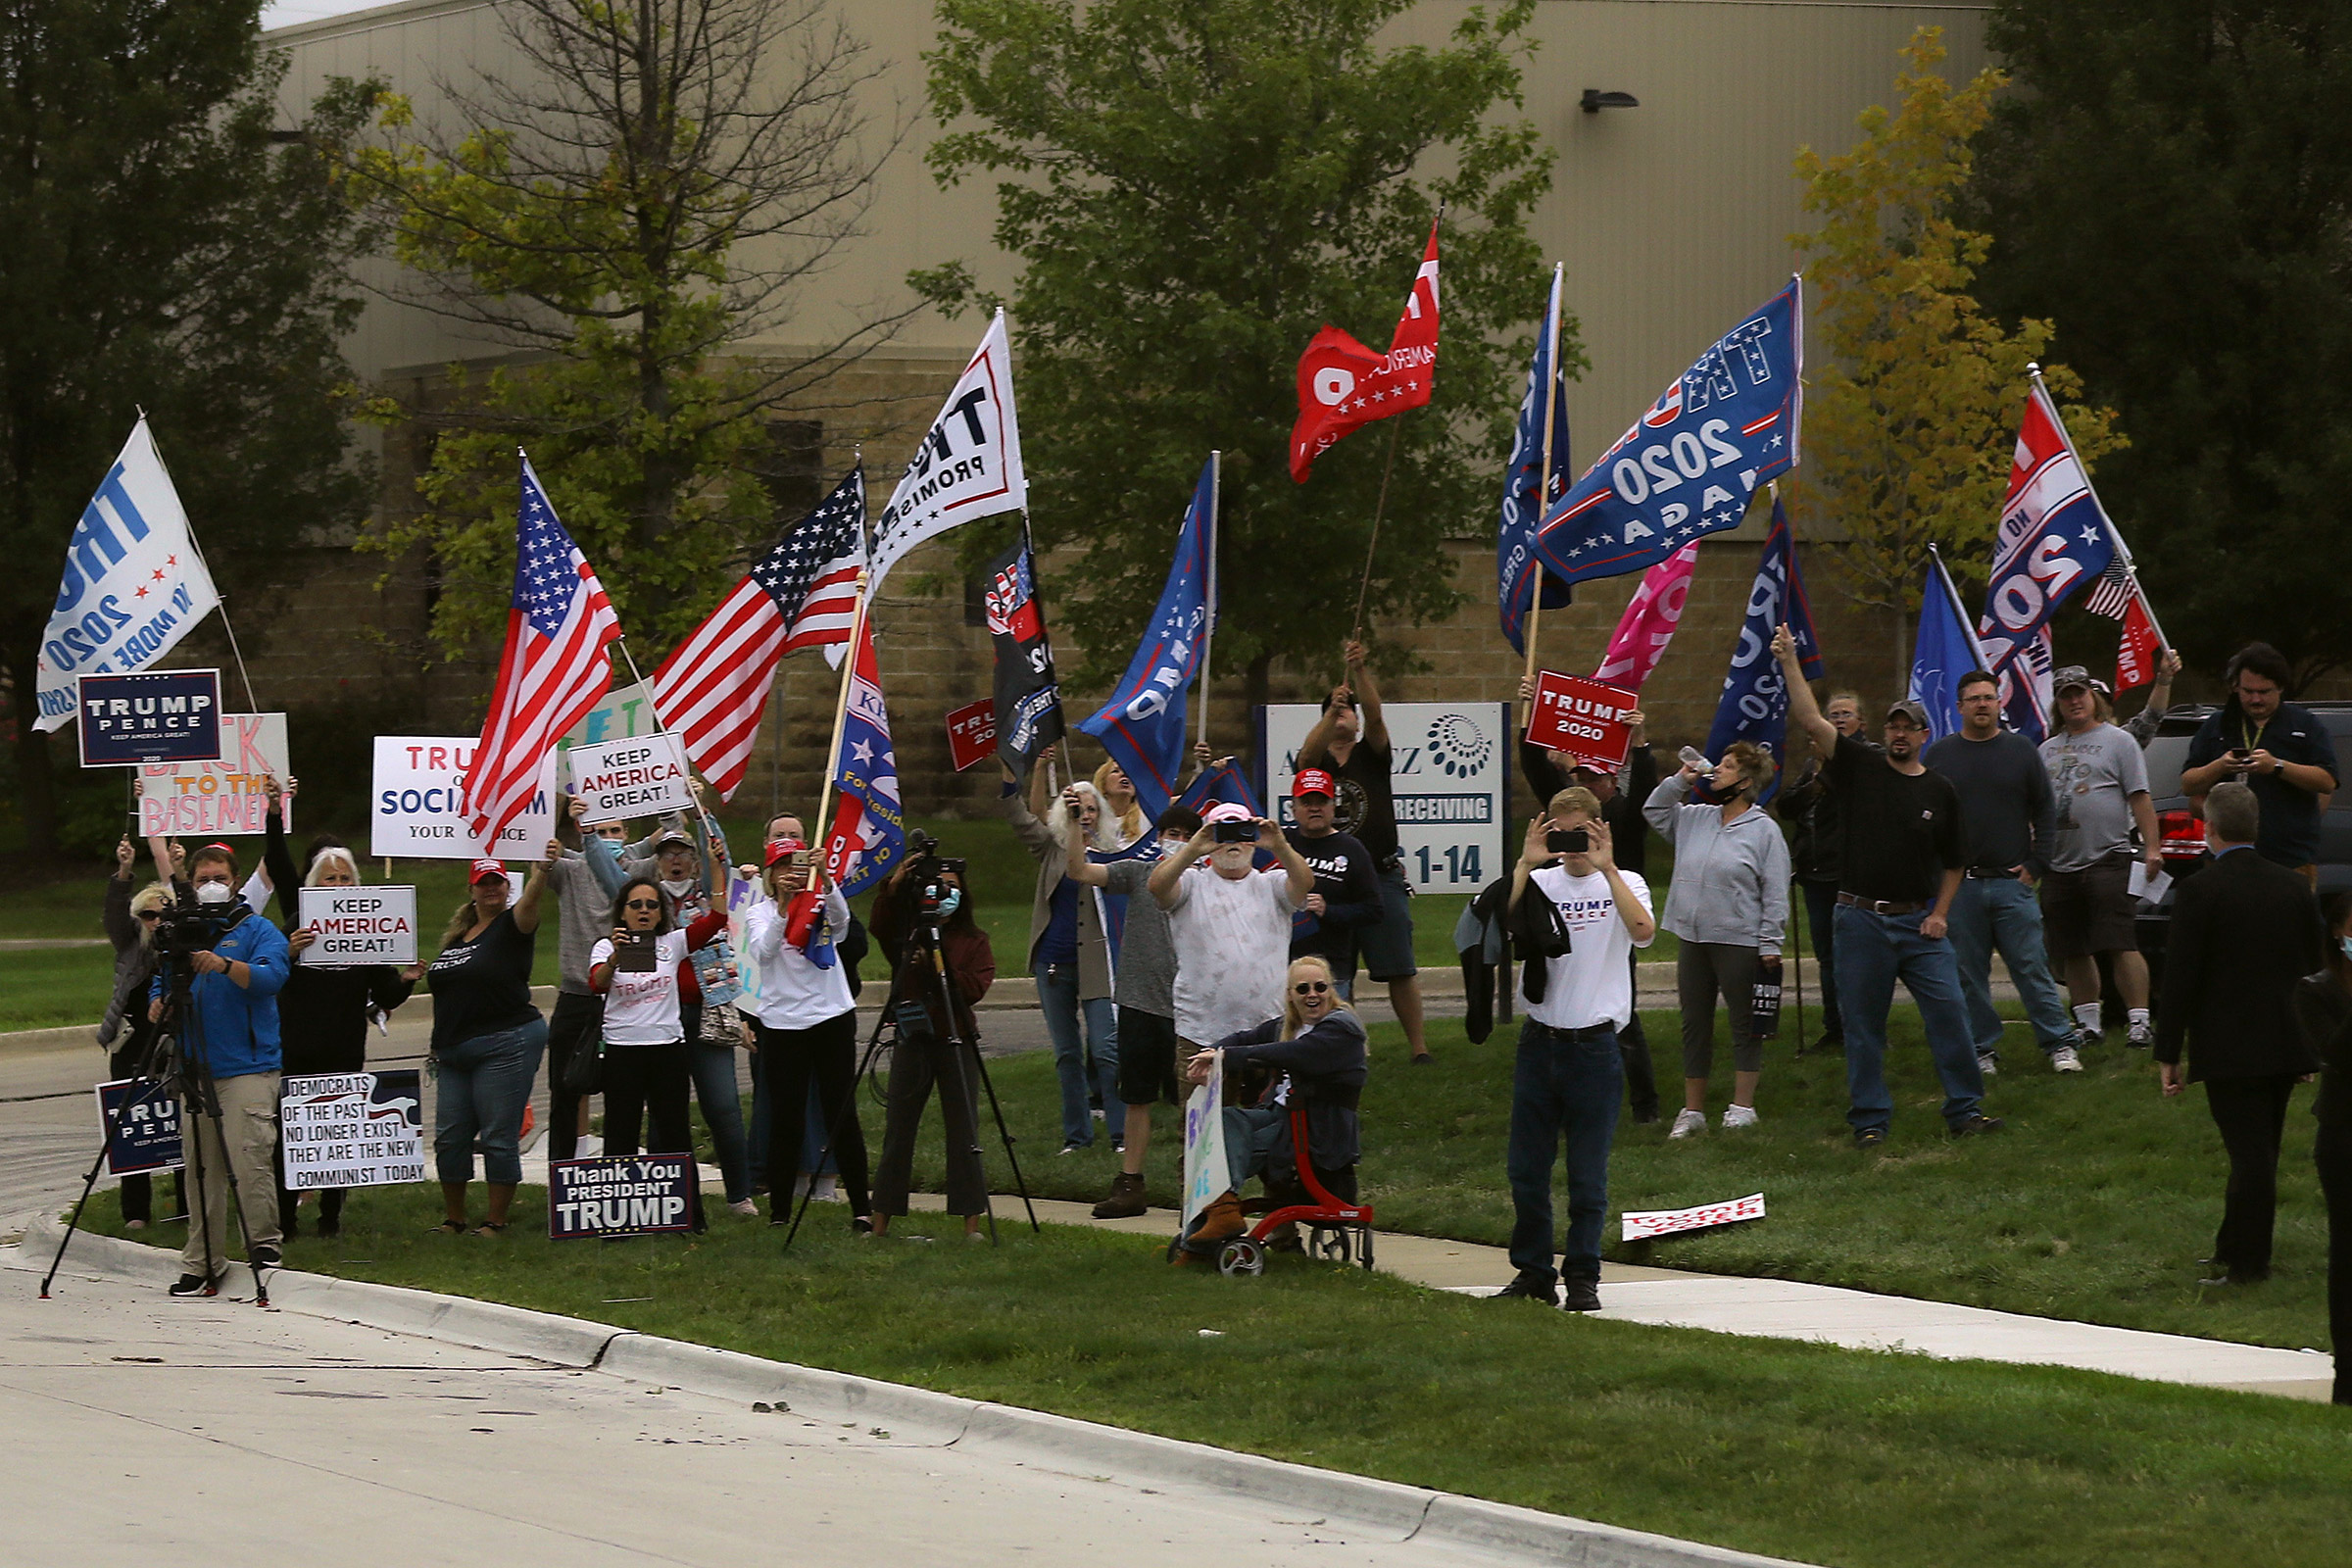 Supporters of President Donald Trump gather across the street from the United Auto Workers Region 1 offices where Democratic presidential nominee and former Vice President Joe Biden is scheduled to speak in Warren, Mich., on Sept. 09, 2020. (Chip Somodevilla—Getty Images)